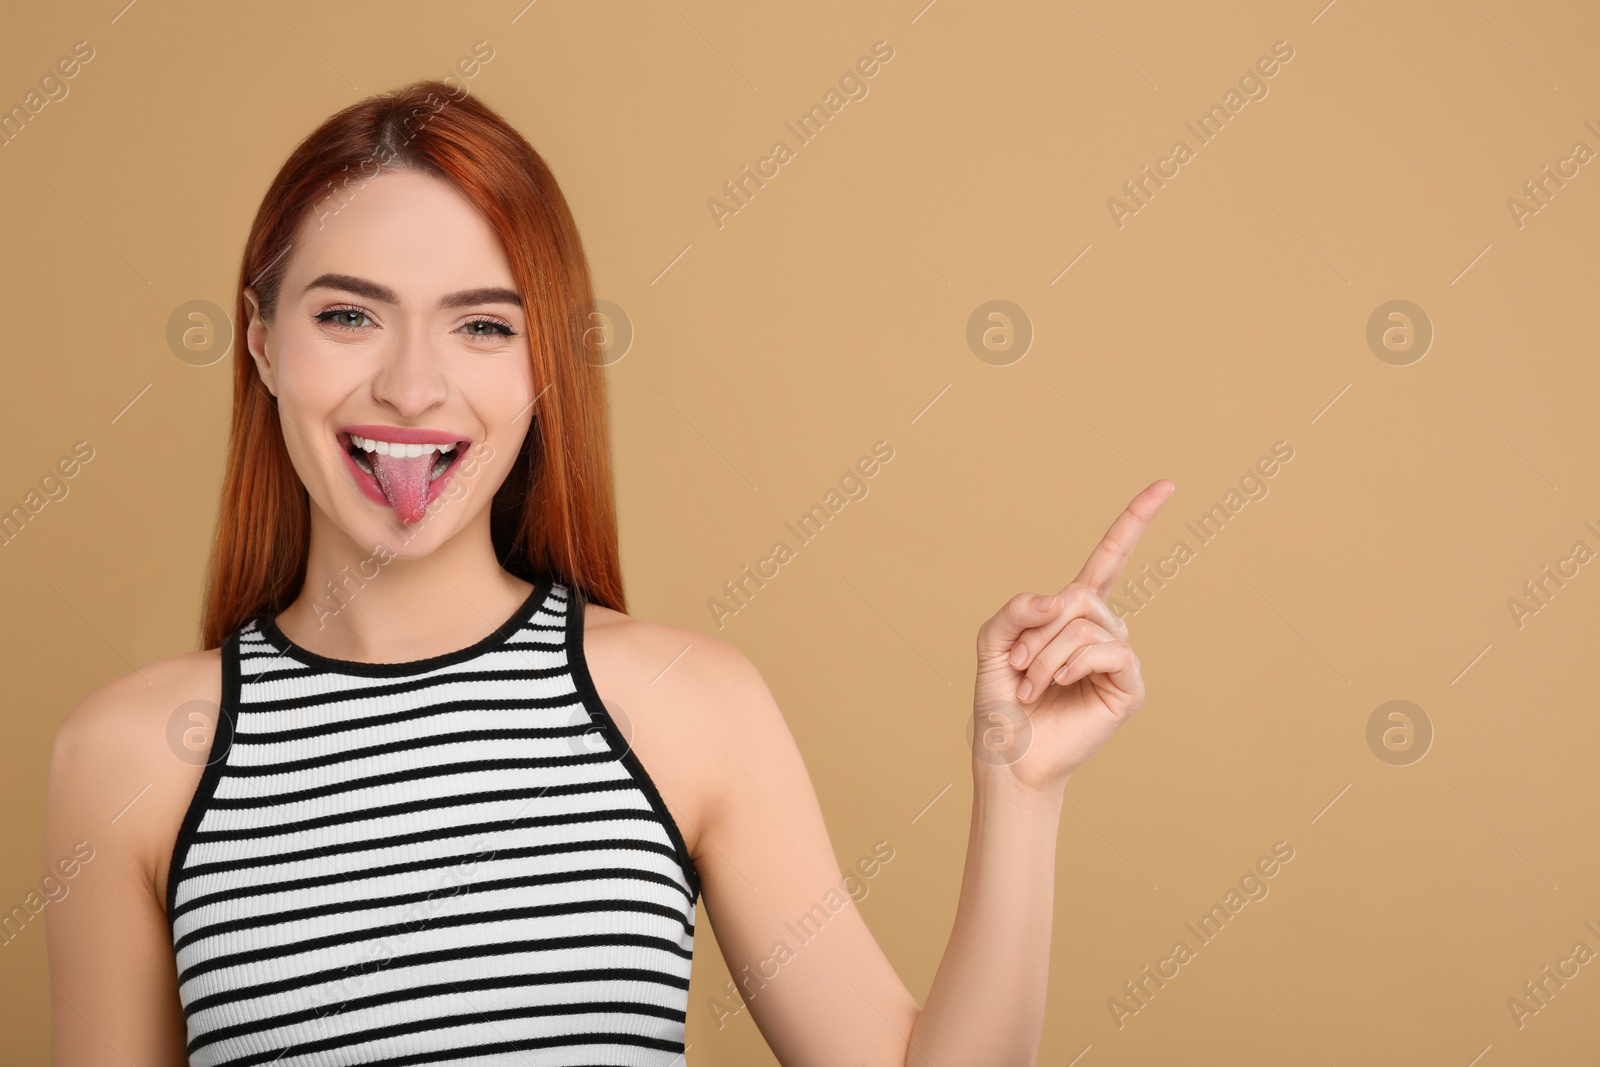 Photo of Happy woman showing her tongue and pointing at something on beige background. Space for text